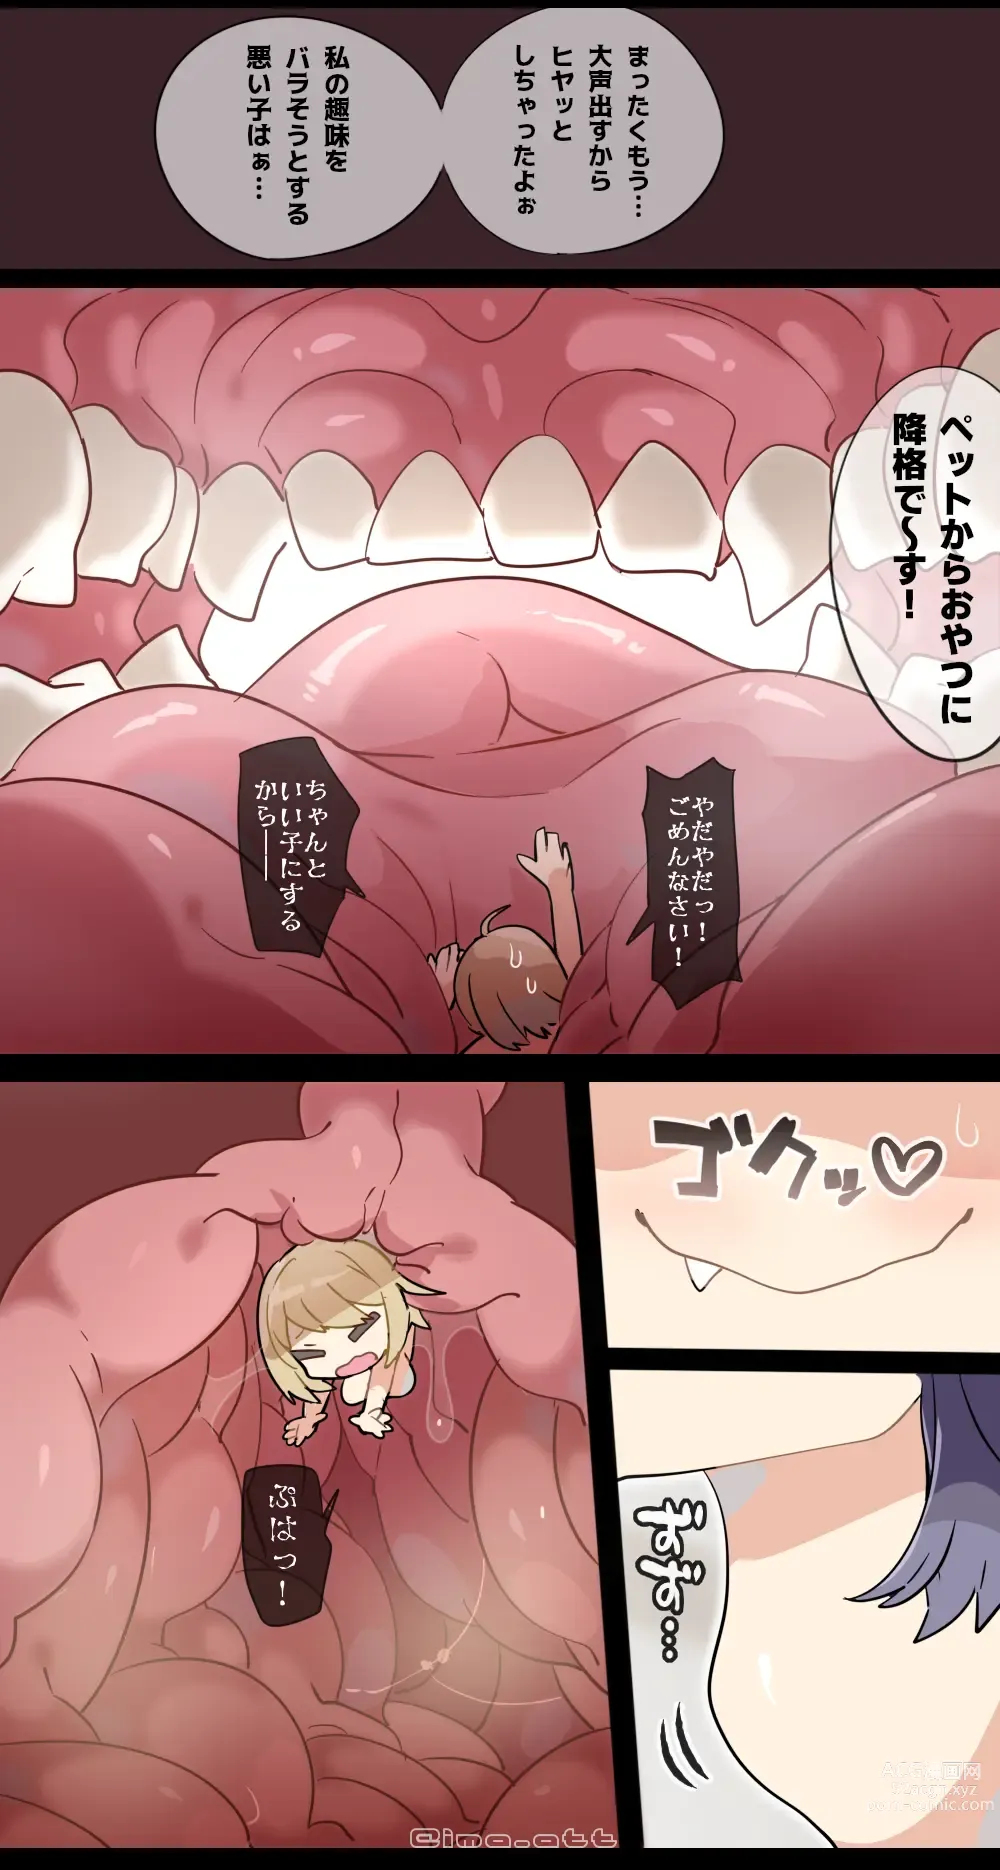 Page 10 of doujinshi Gloomy Woman  VORE